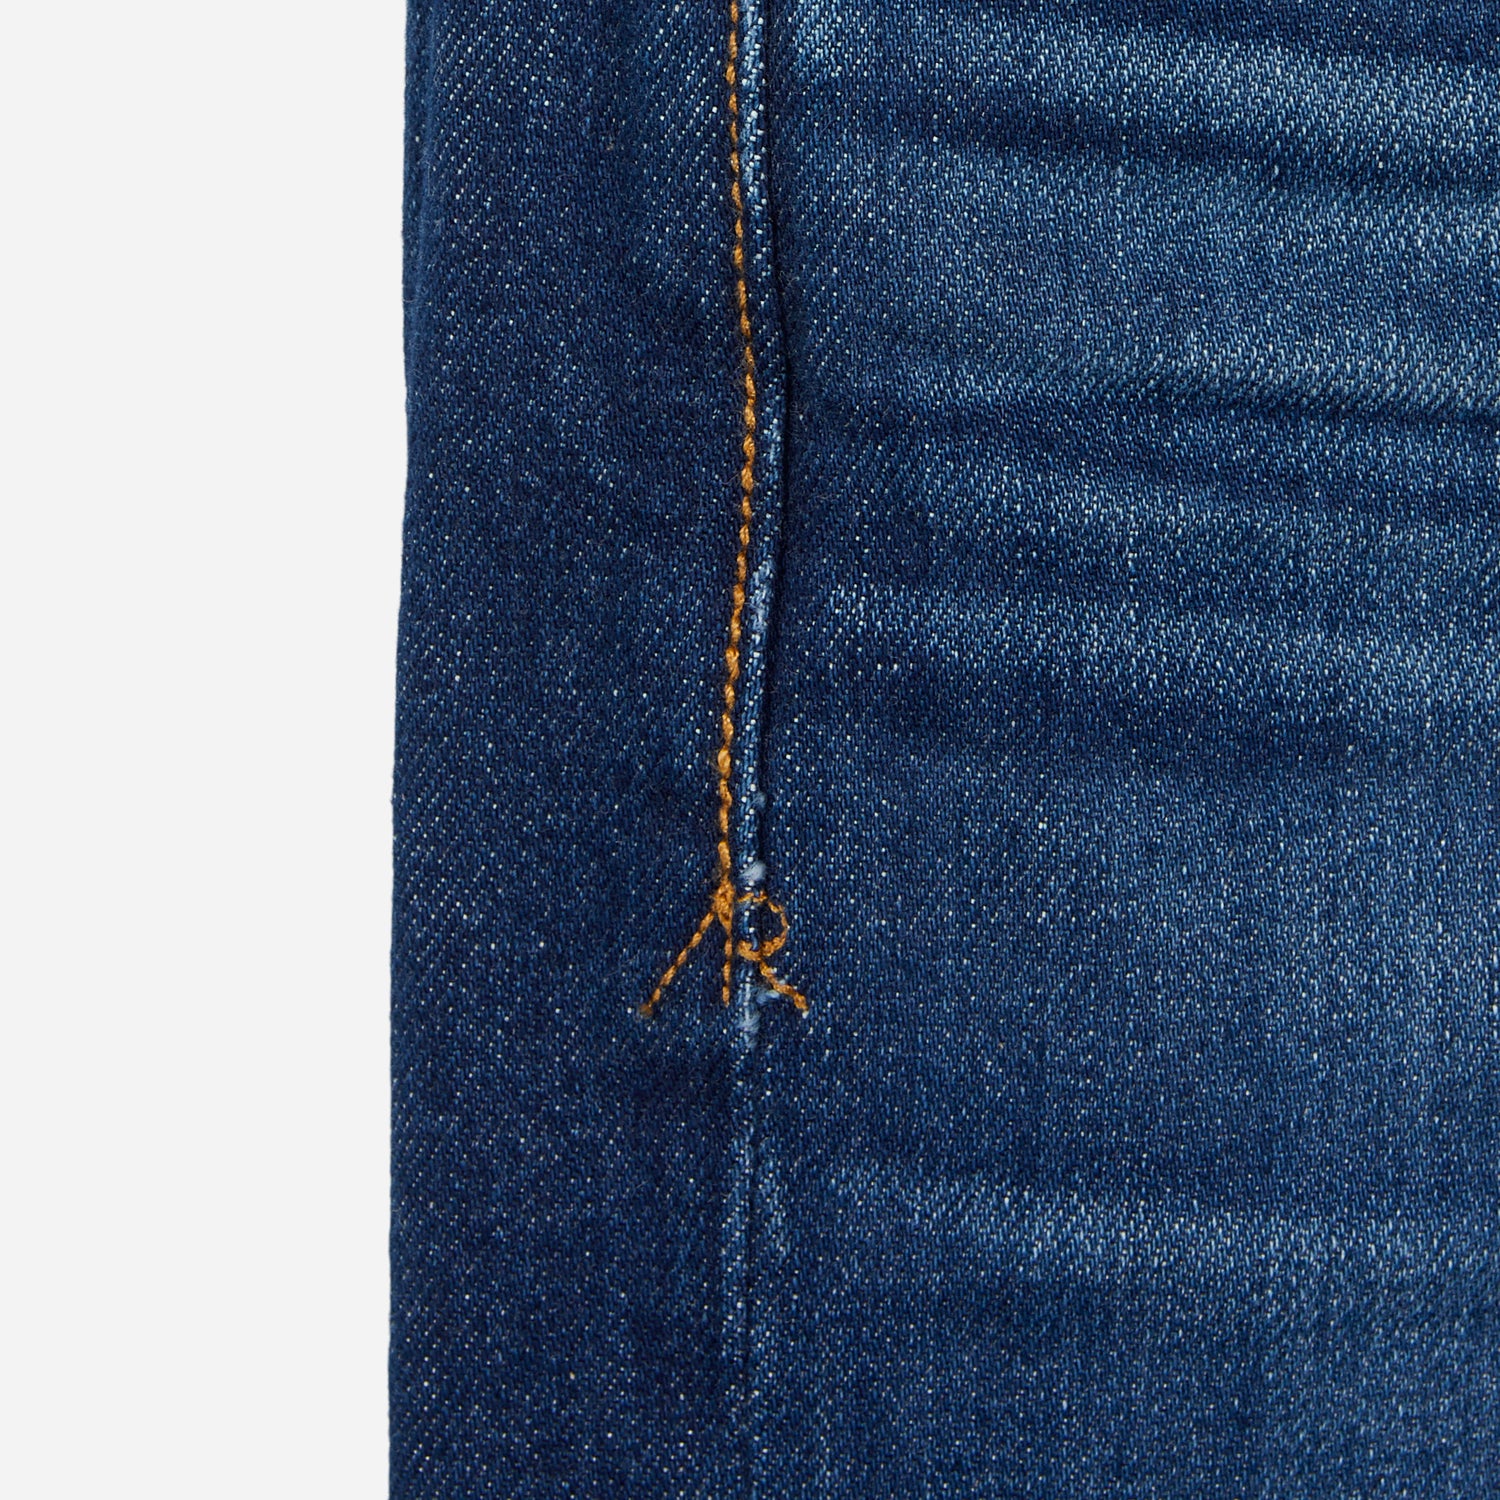 close up of stitching of pair of high quality slim cut men's dark blue jeans with slight wear